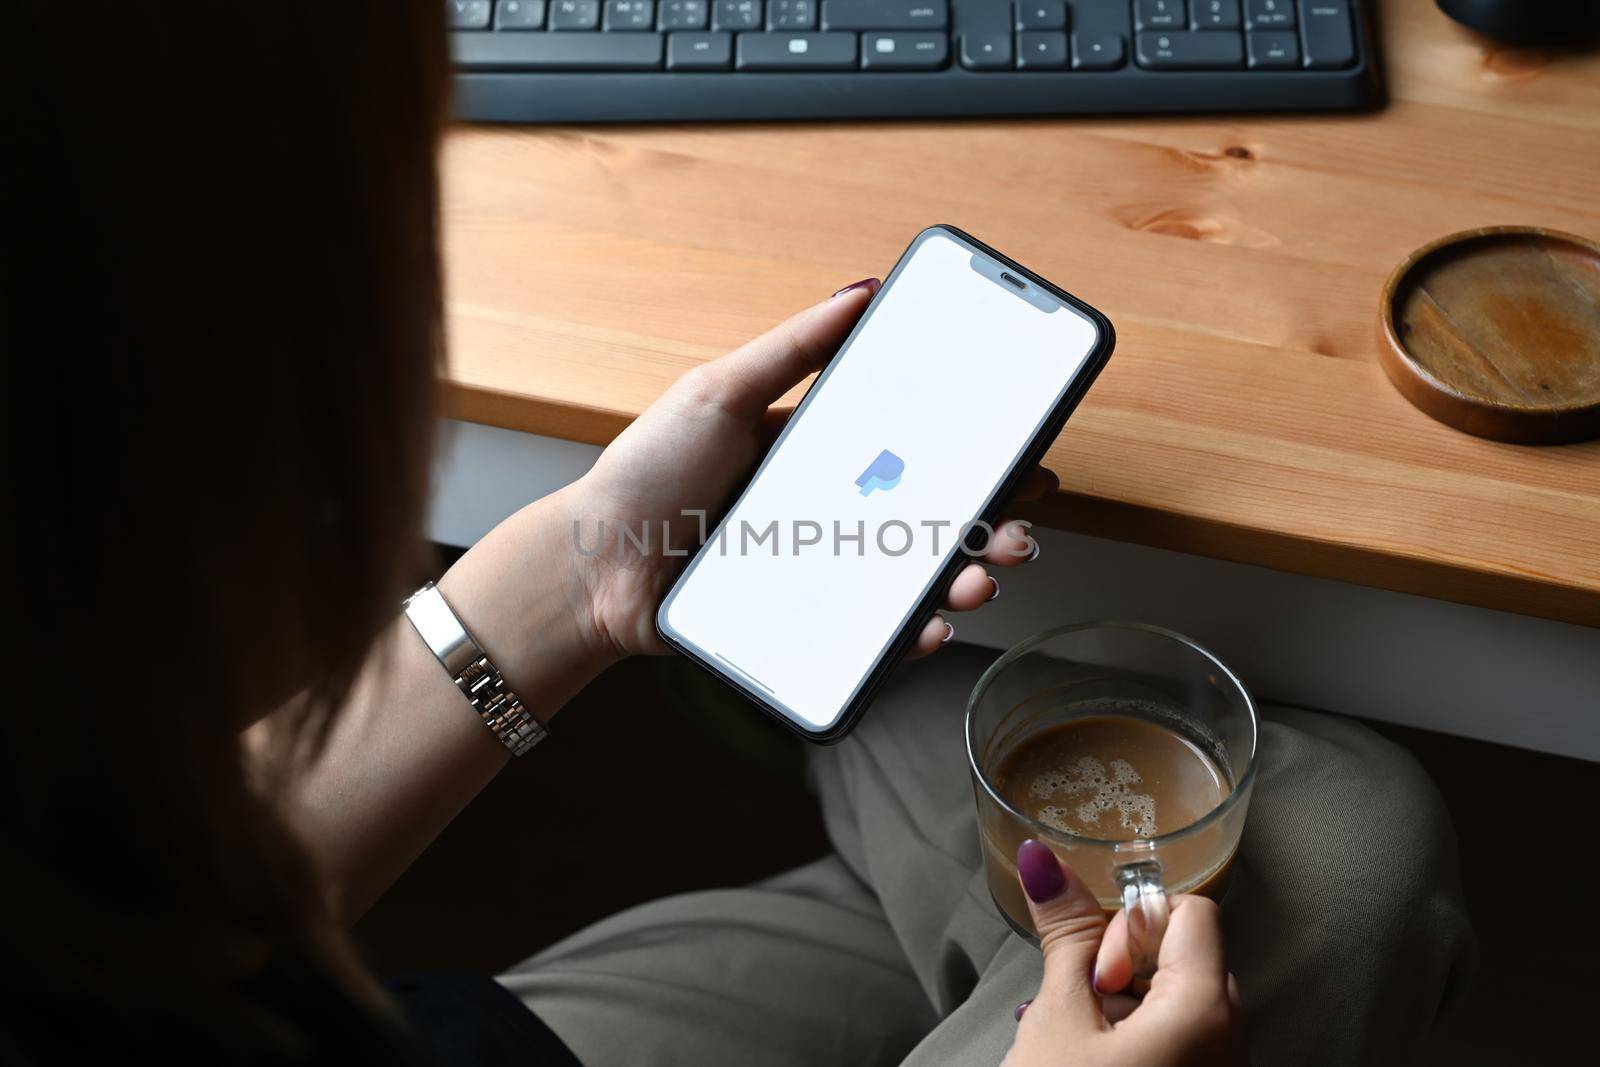 Chiang Mai, Thailand - Mar 01,2022: Woman holding iPhone 11 Pro Max with PayPal app on screen. PayPal is an internet based digital money transfer service.